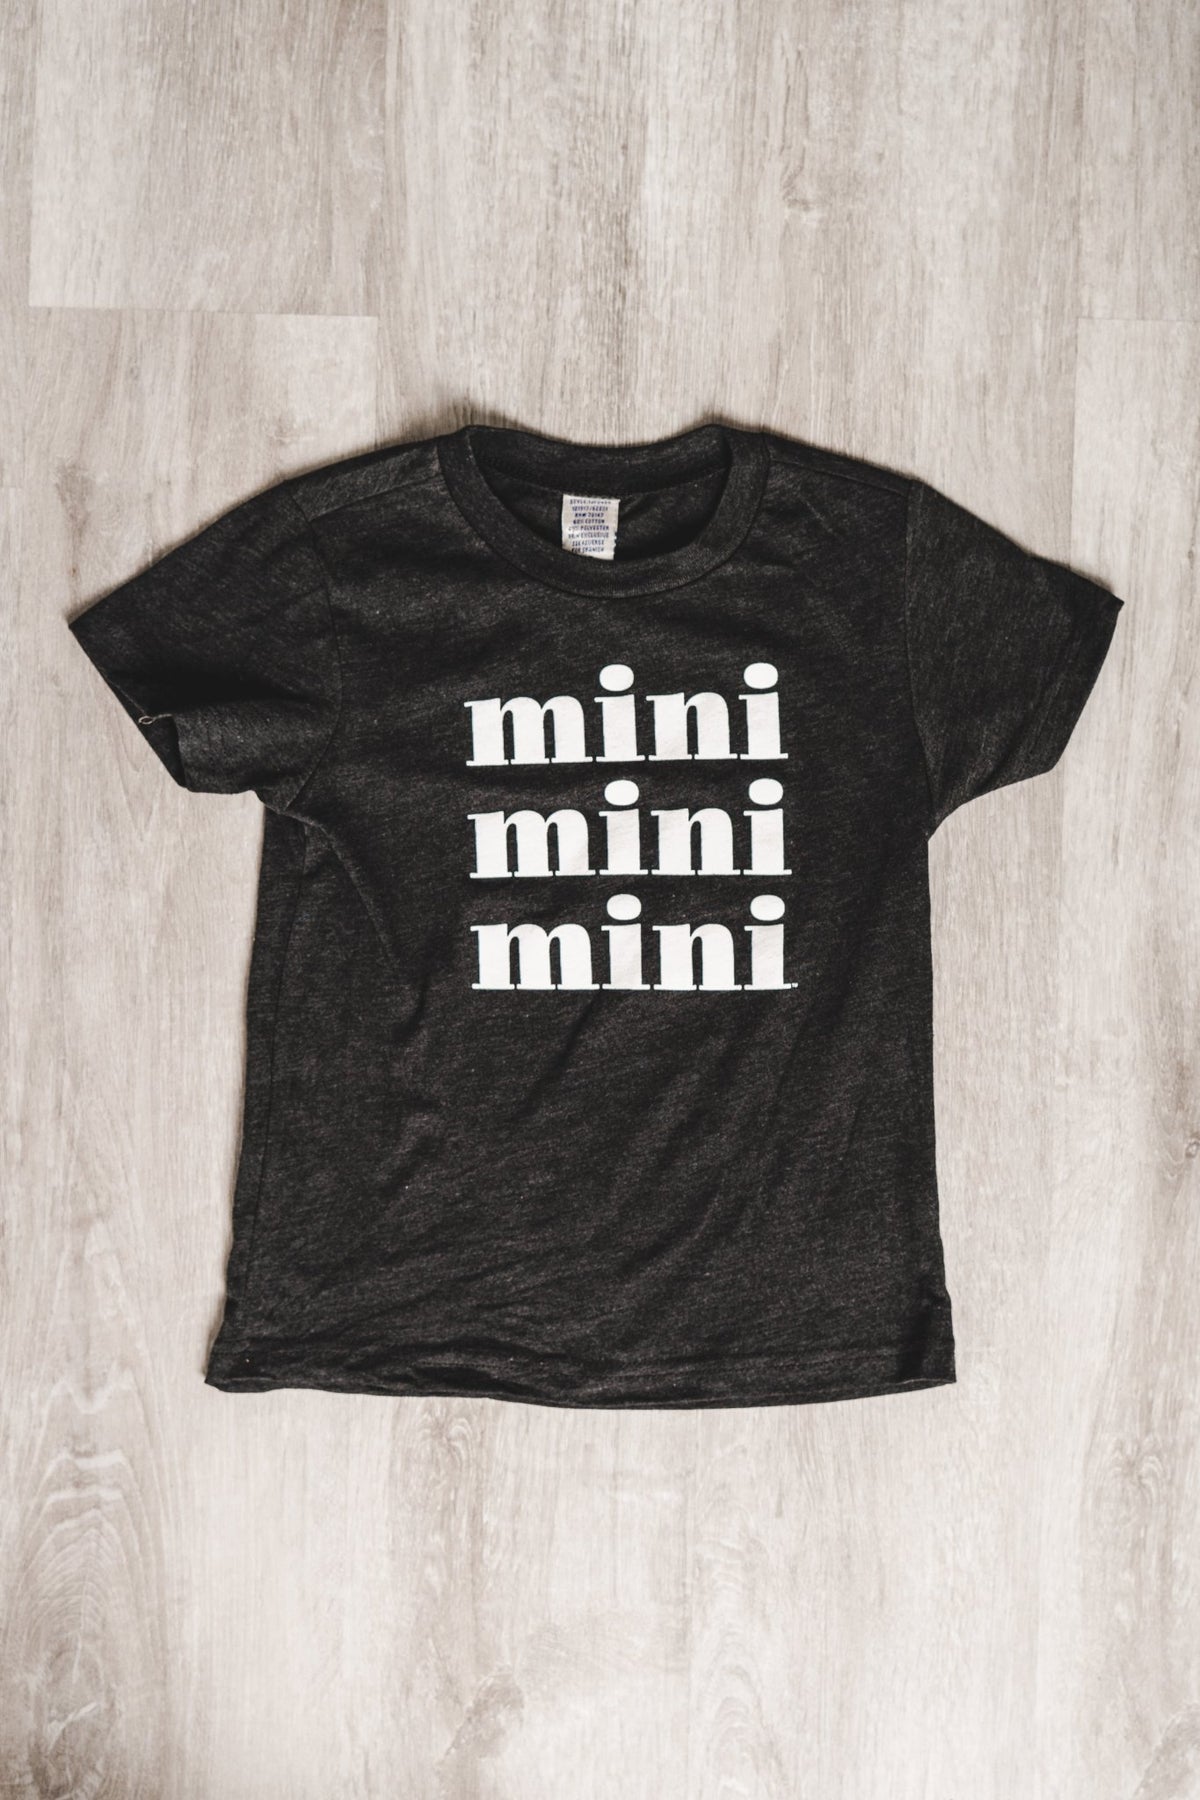 KIDS mini repeater t-shirt charcoal - Stylish T-shirts - Cute Mommy and Me Apparel at Lush Fashion Lounge Boutique in Oklahoma